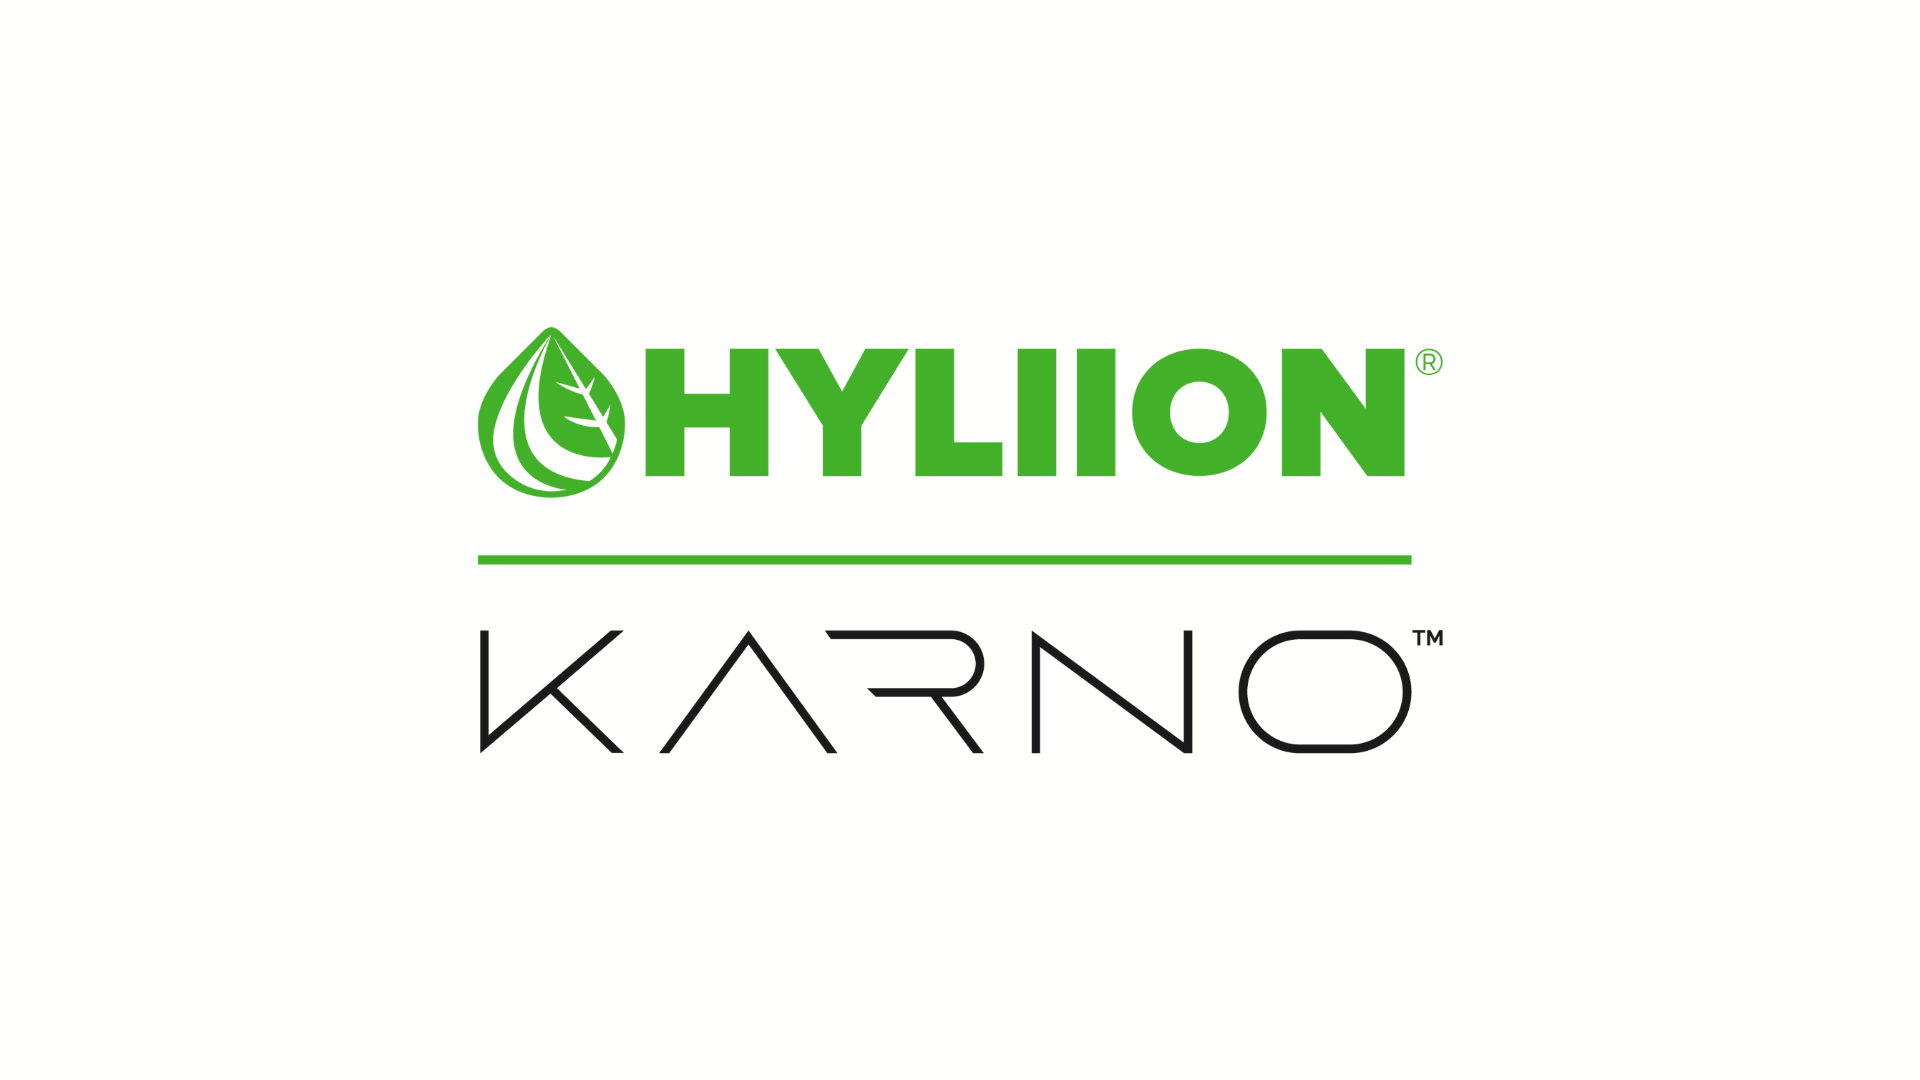 Hyliion announced it has entered into a definitive agreement to acquire a new hydrogen and fuel agnostic capable generator (“KARNO”) from GE Additive.